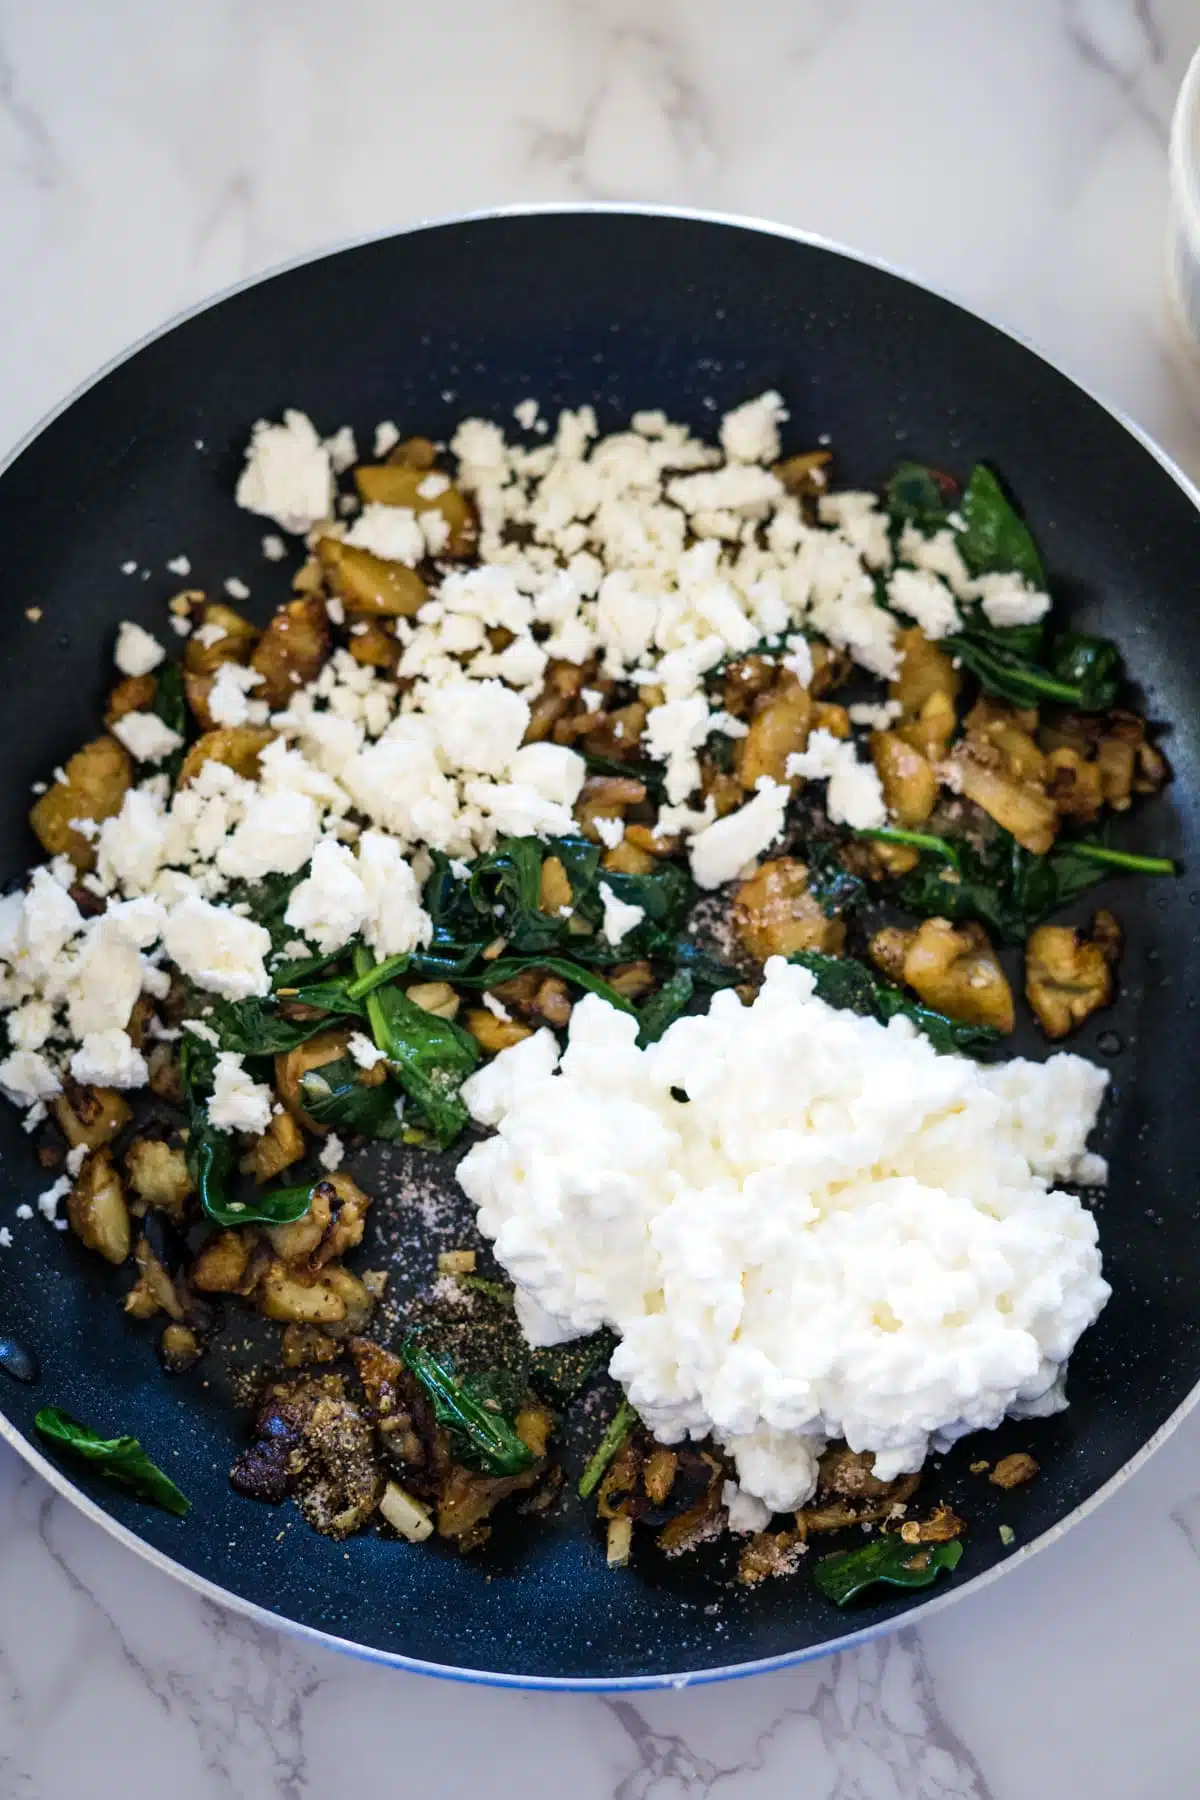 A delicious eggplant boats stuffed with spinach and feta cheese cooked in a frying pan.